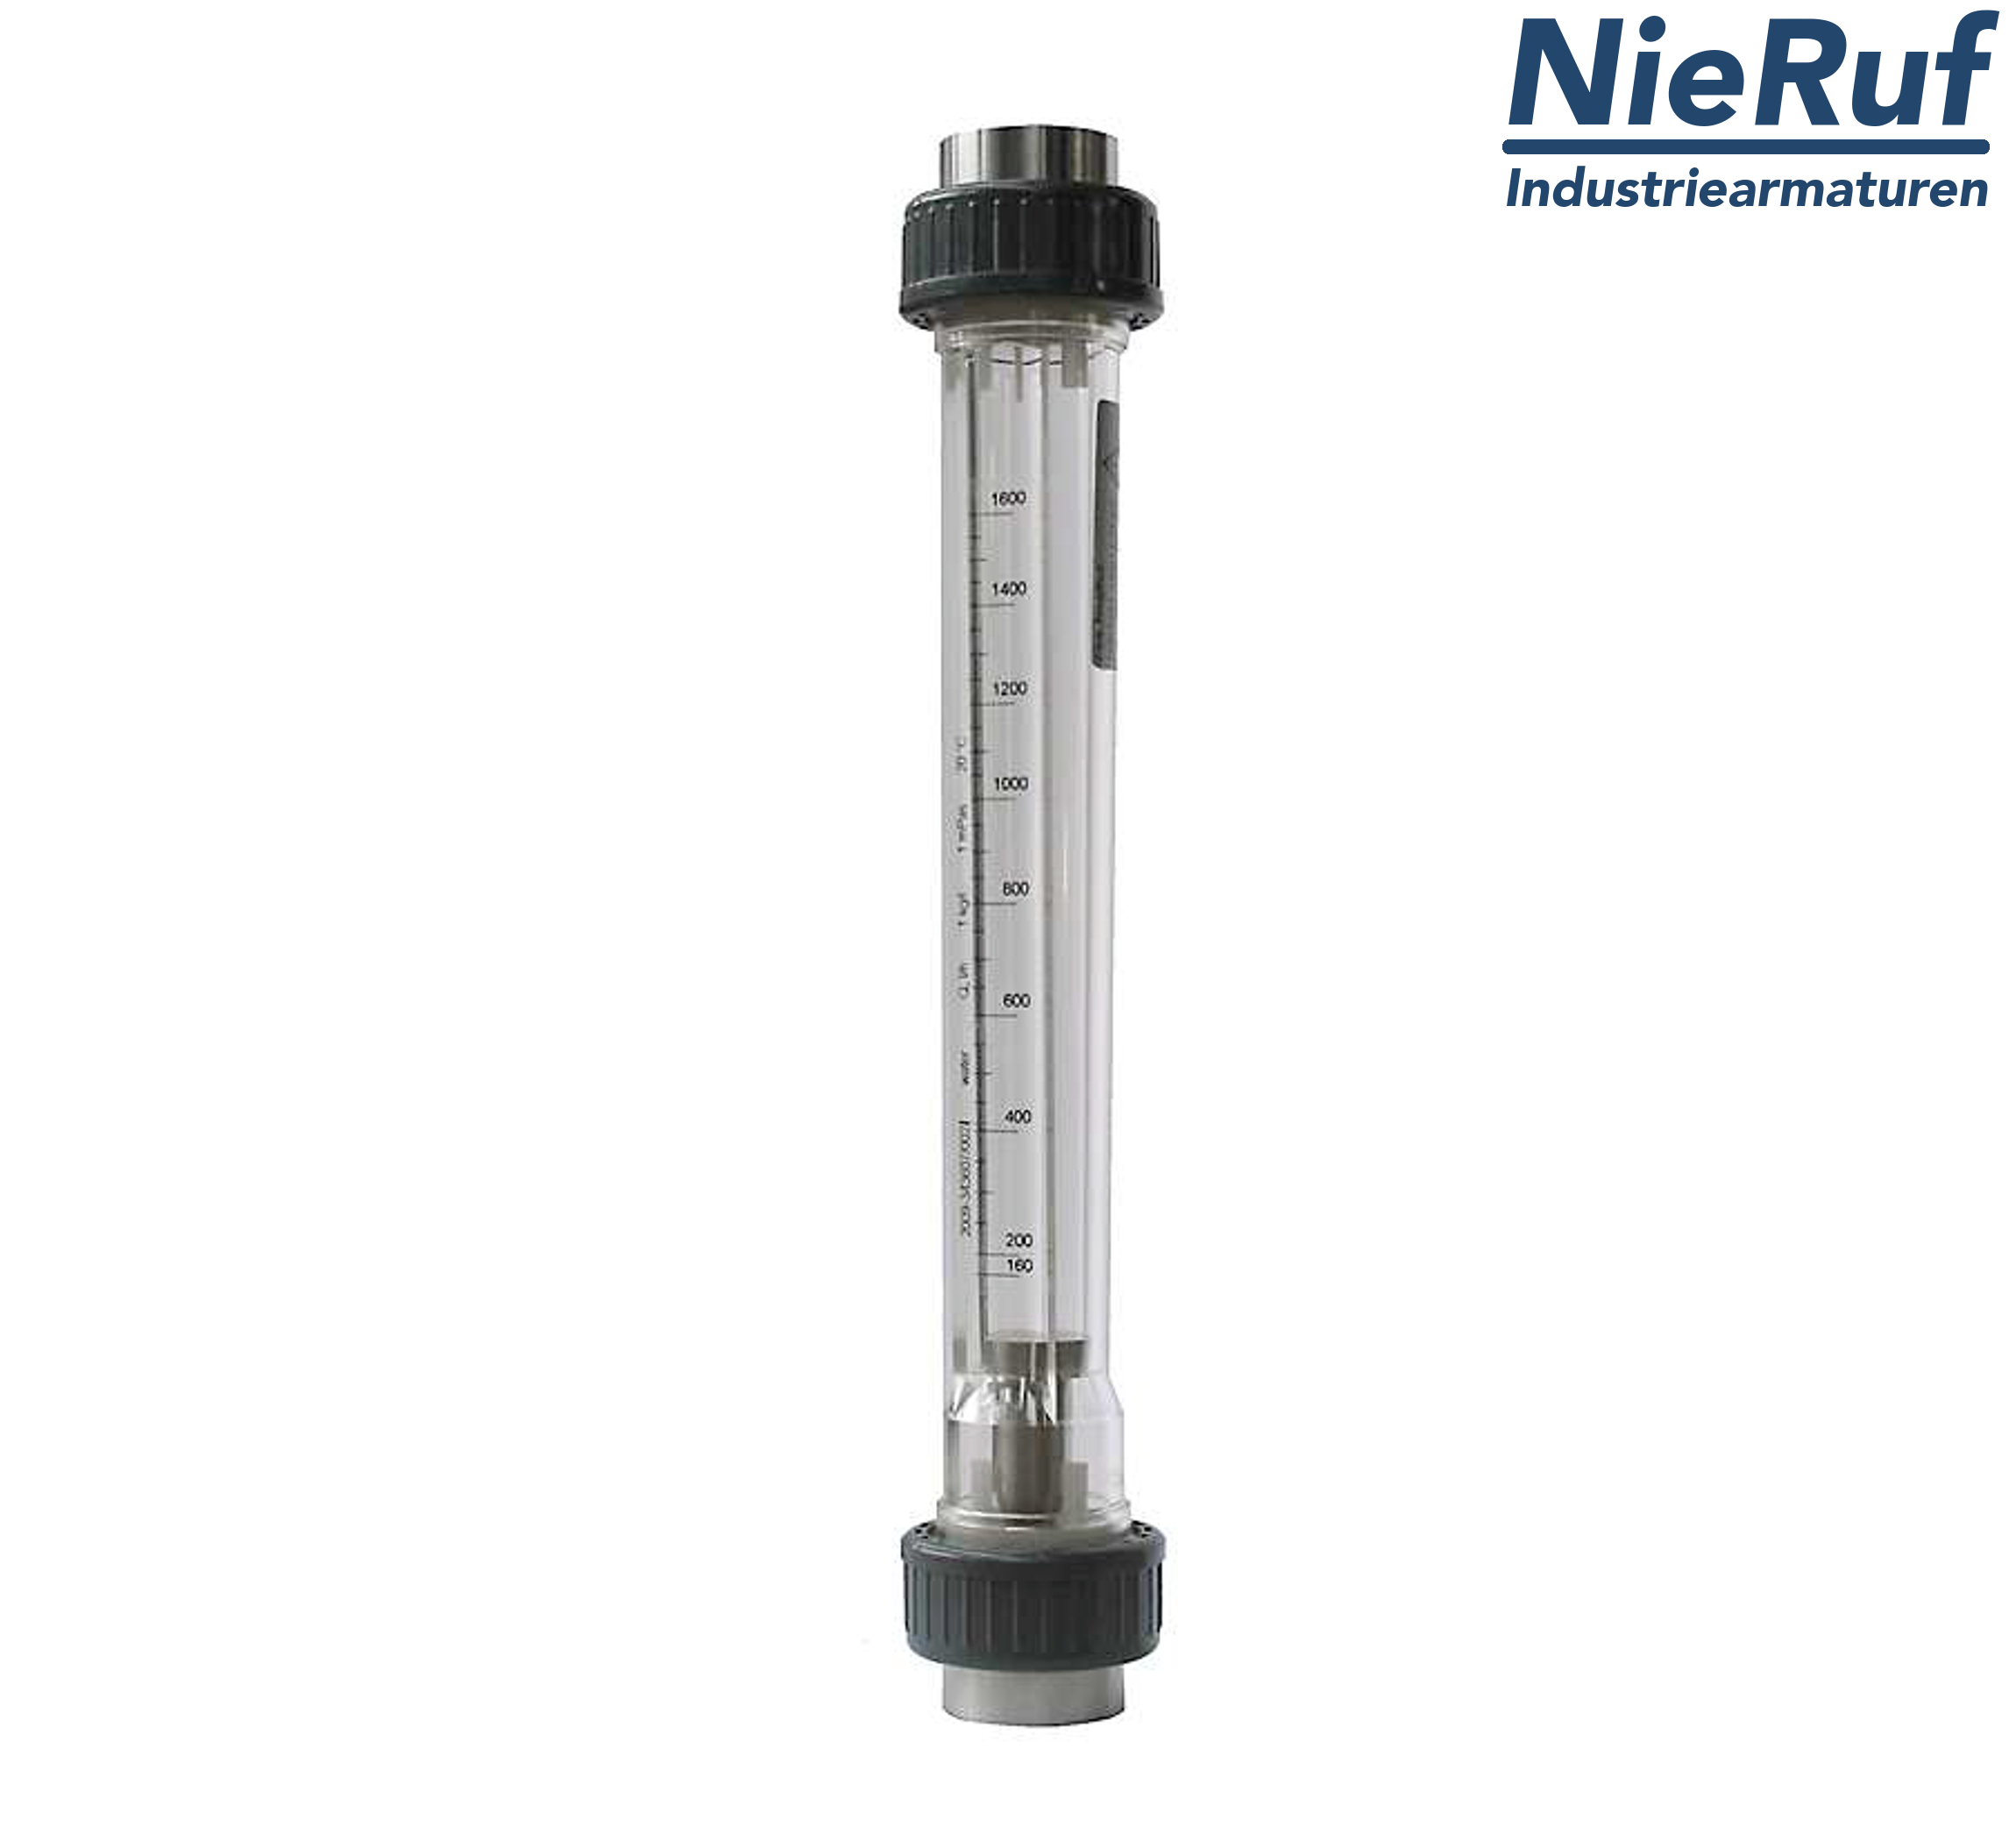 Variable area flowmeter 2" inch 4000.0 - 16000 l/h water FKM